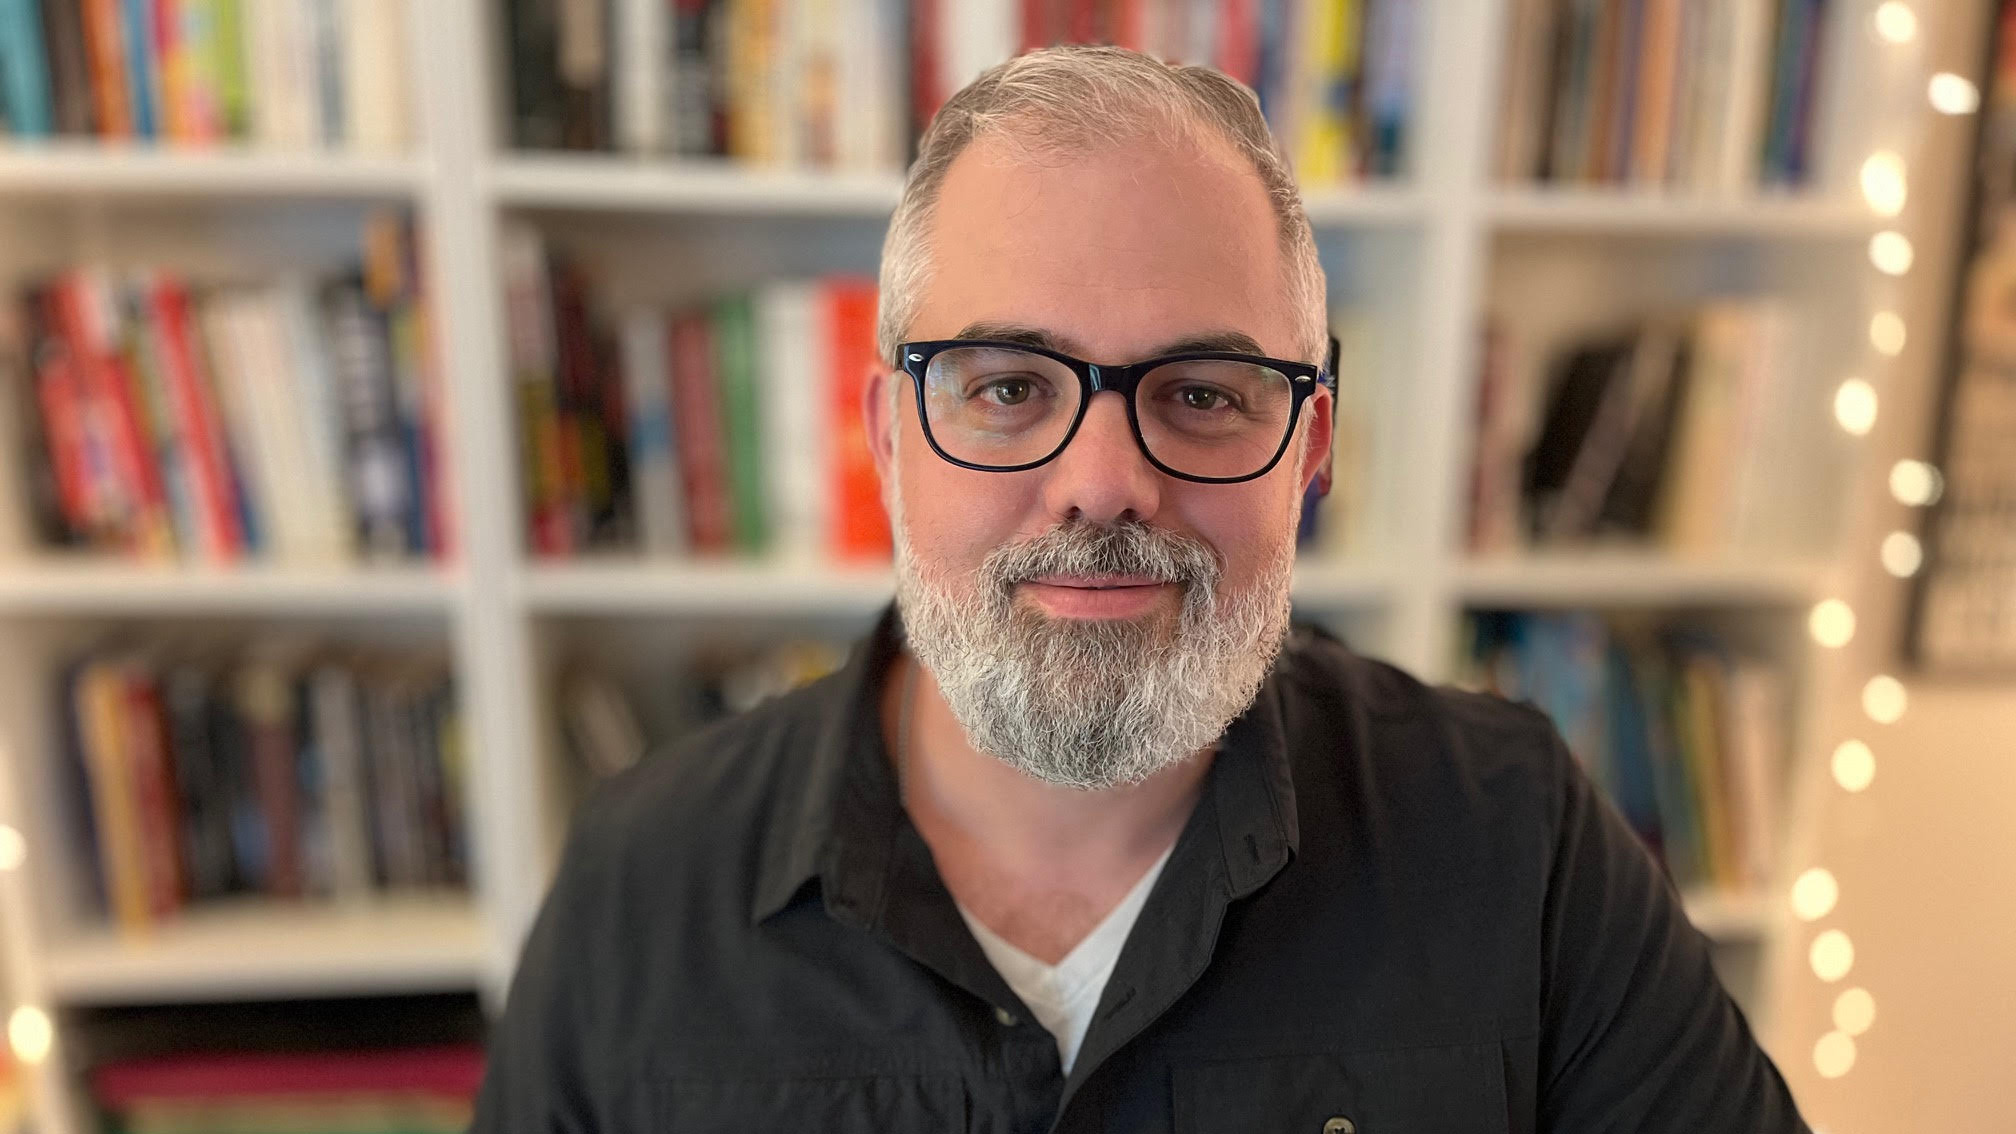 Photo of bearded man wearing glasses in front of bookshelf